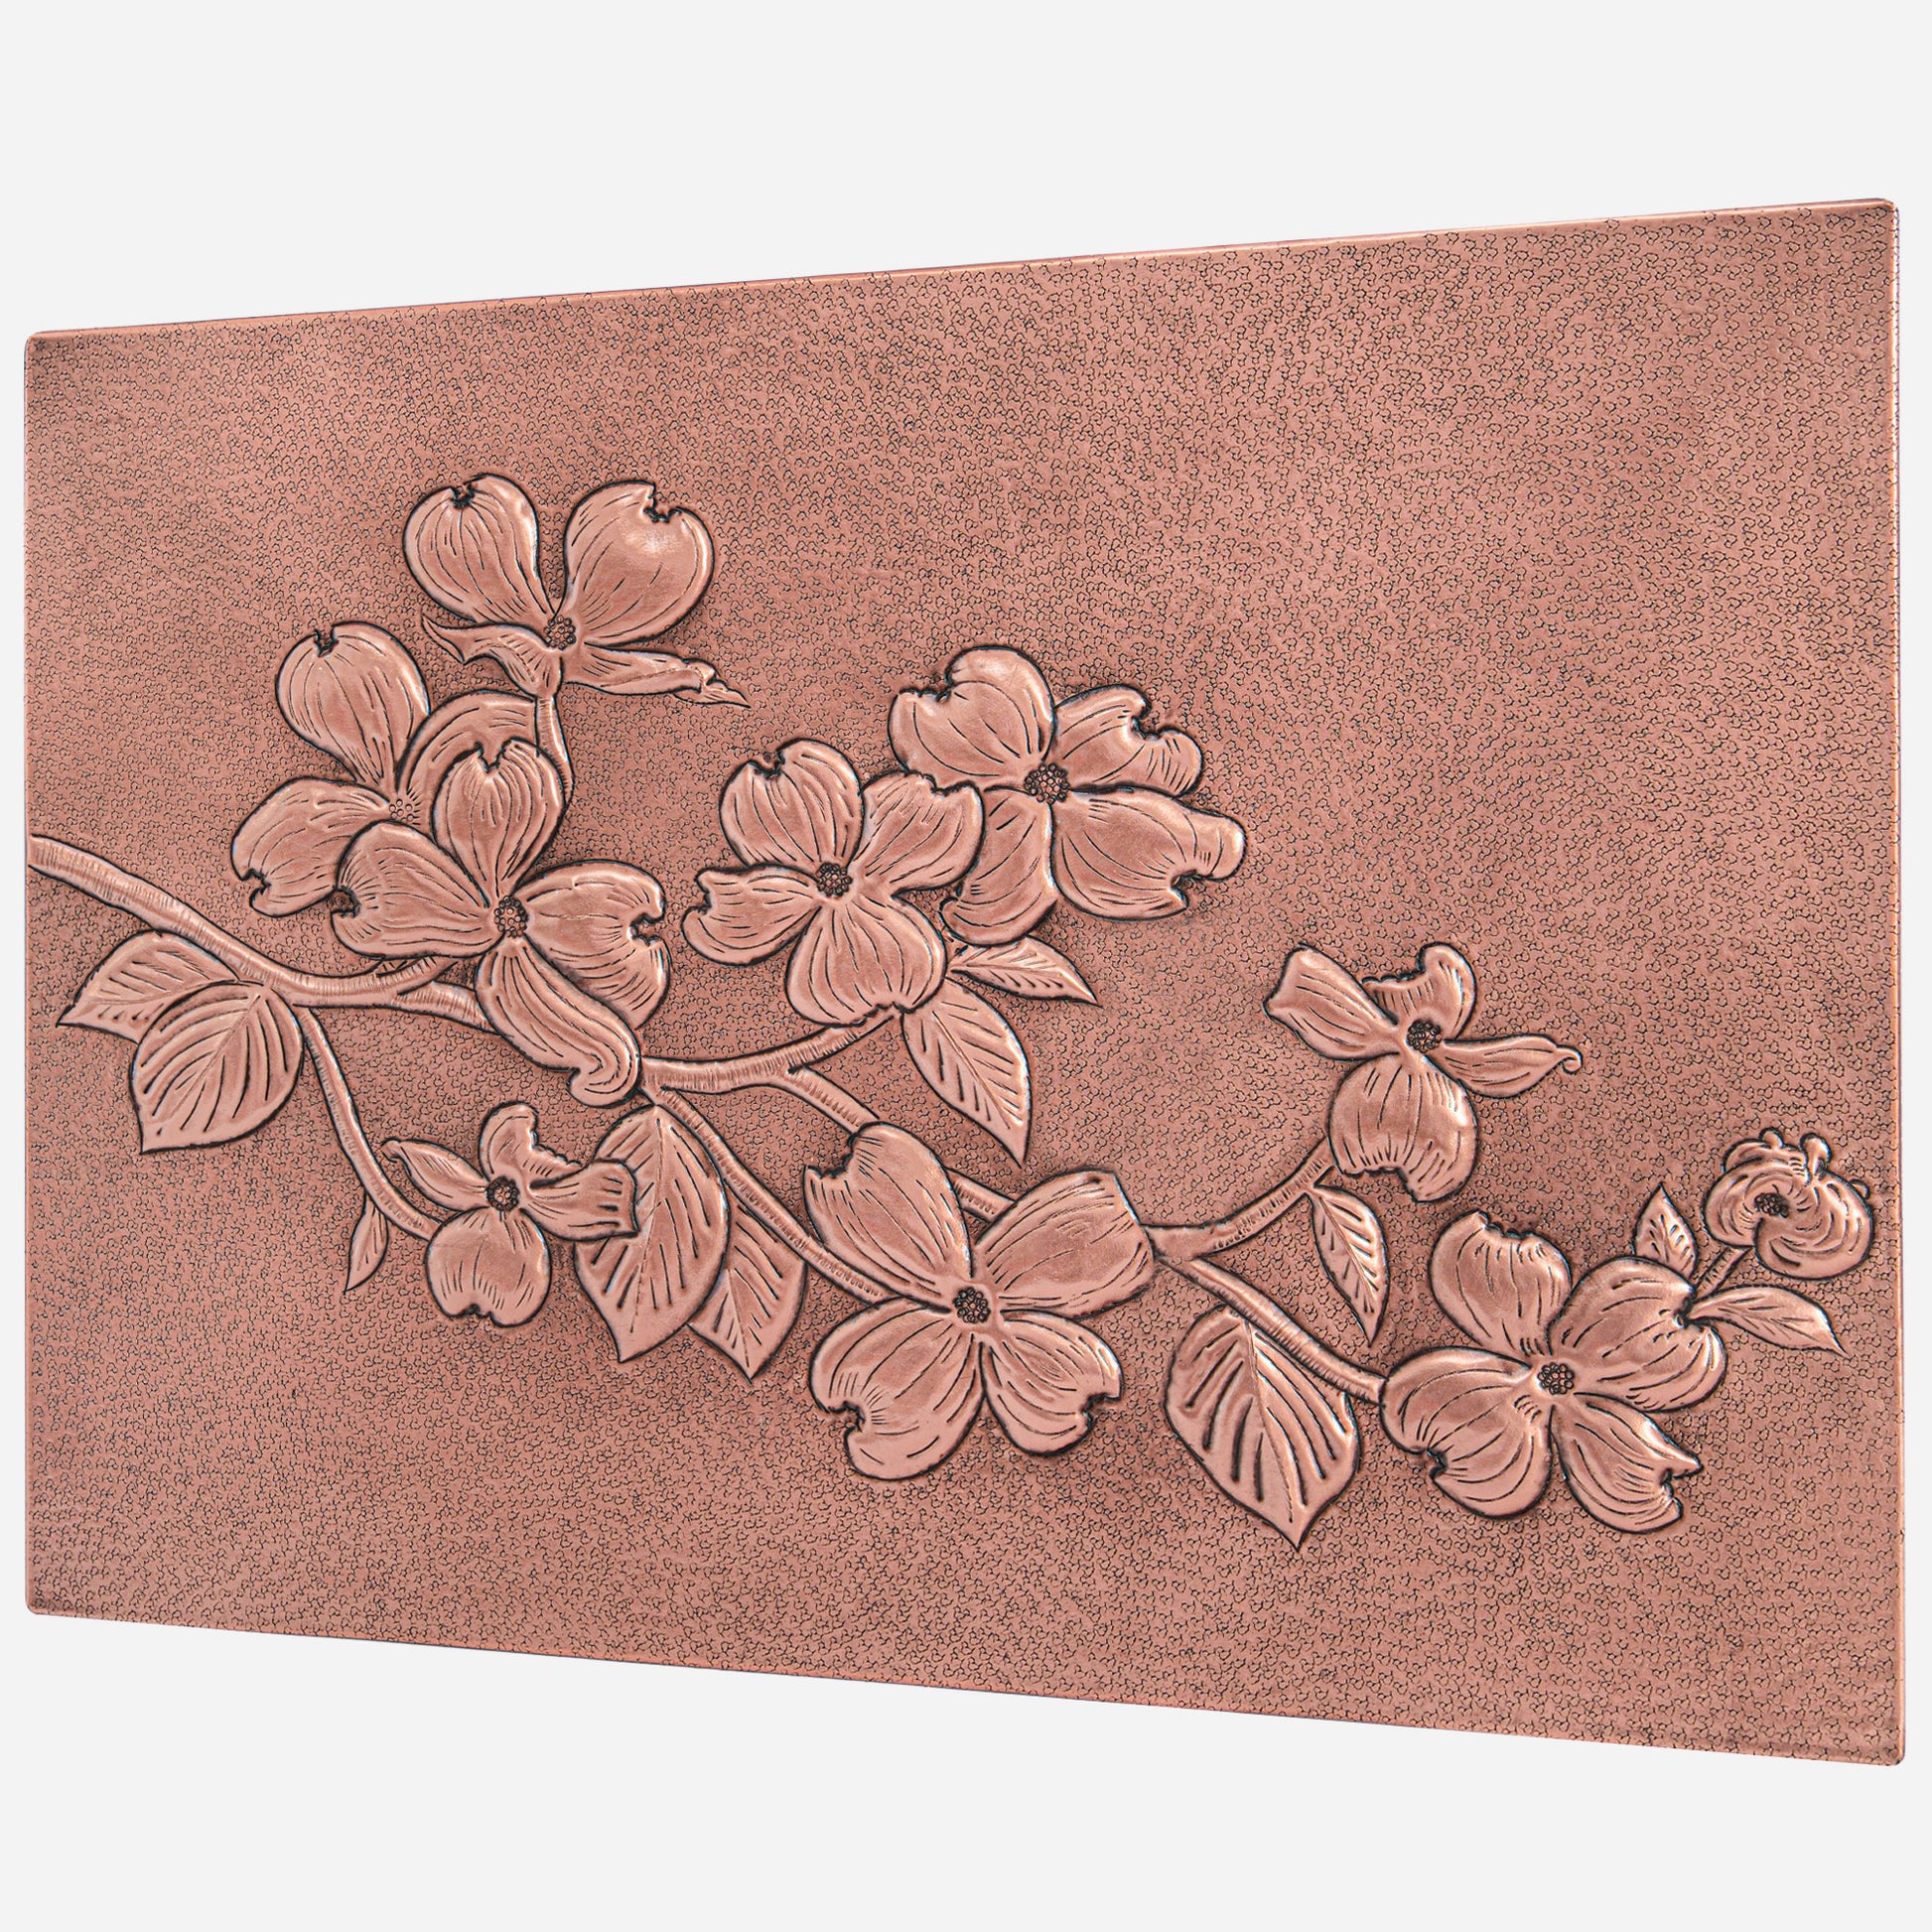 Copper Backsplash Panel (Branch of Dogwood with Flowers and Leaves)